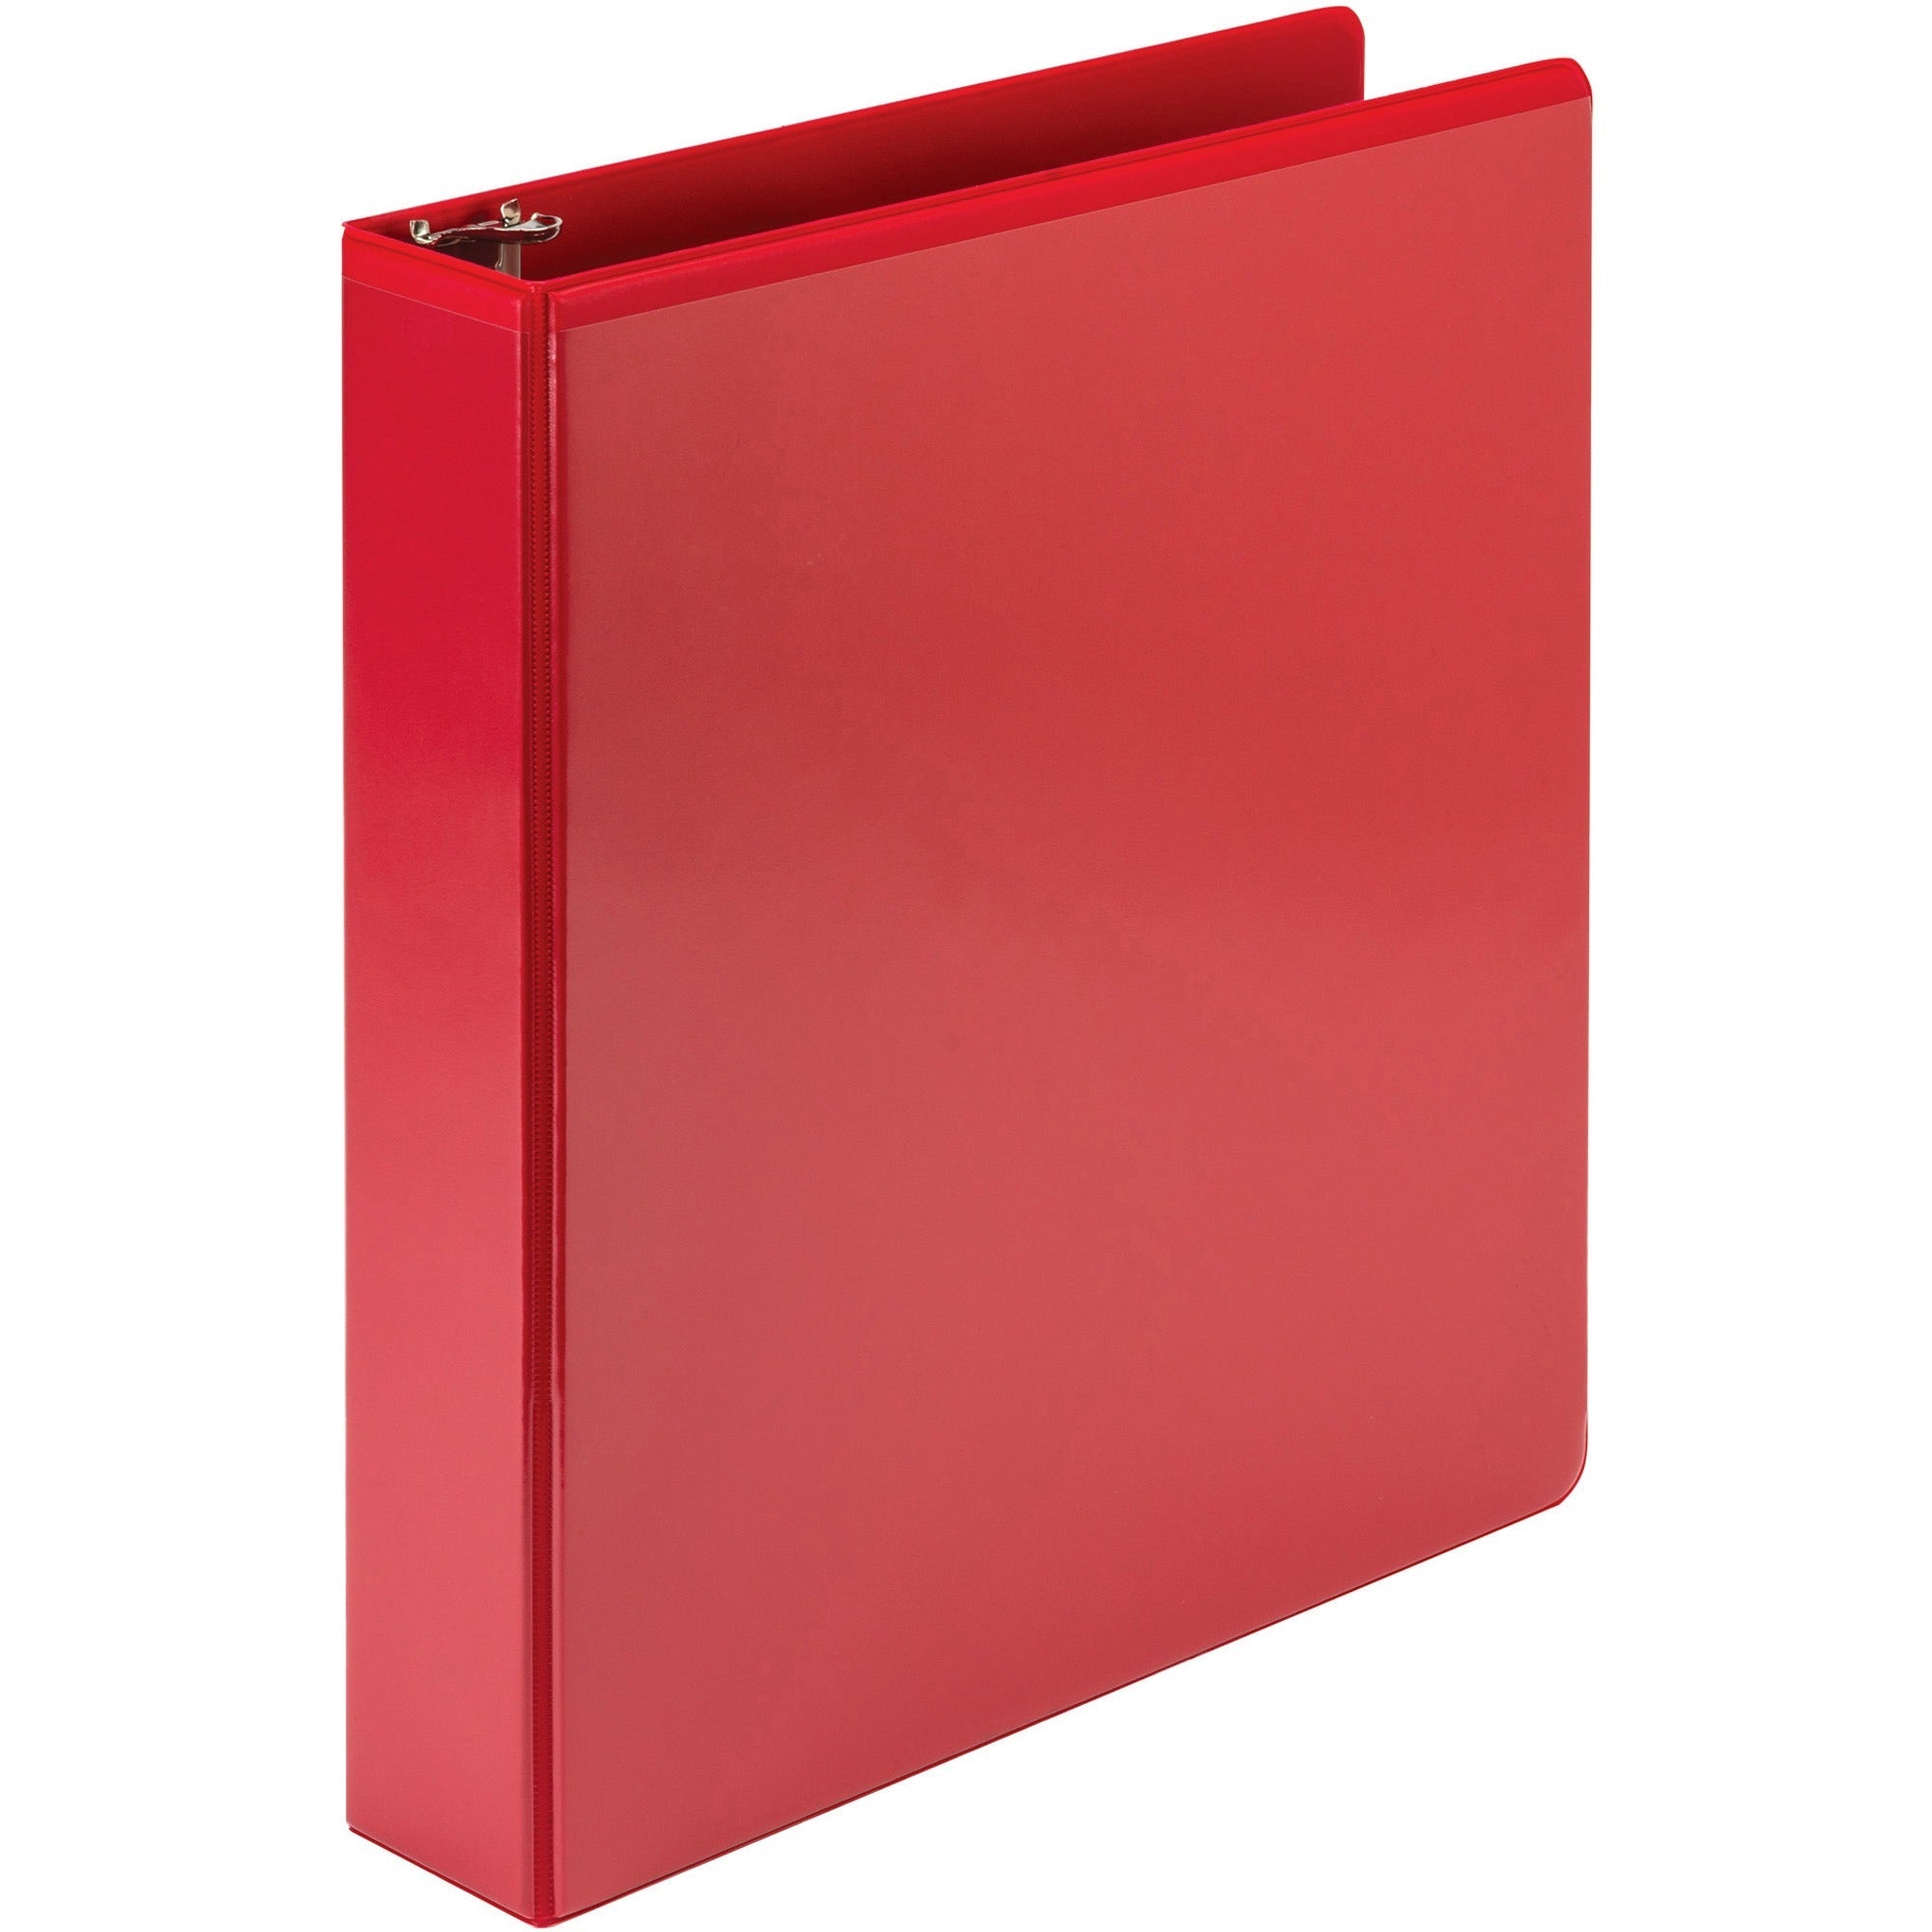 samsill-durable-view-binders-1-1-2-binder-capacity-letter-8-1-2-x-11-sheet-size-350-sheet-capacity-d-ring-fasteners-2-internal-pockets-chipboard-polypropylene-assorted-recycled-clear-overlay-durable-non-glare-pvc-free_sammp46458 - 3